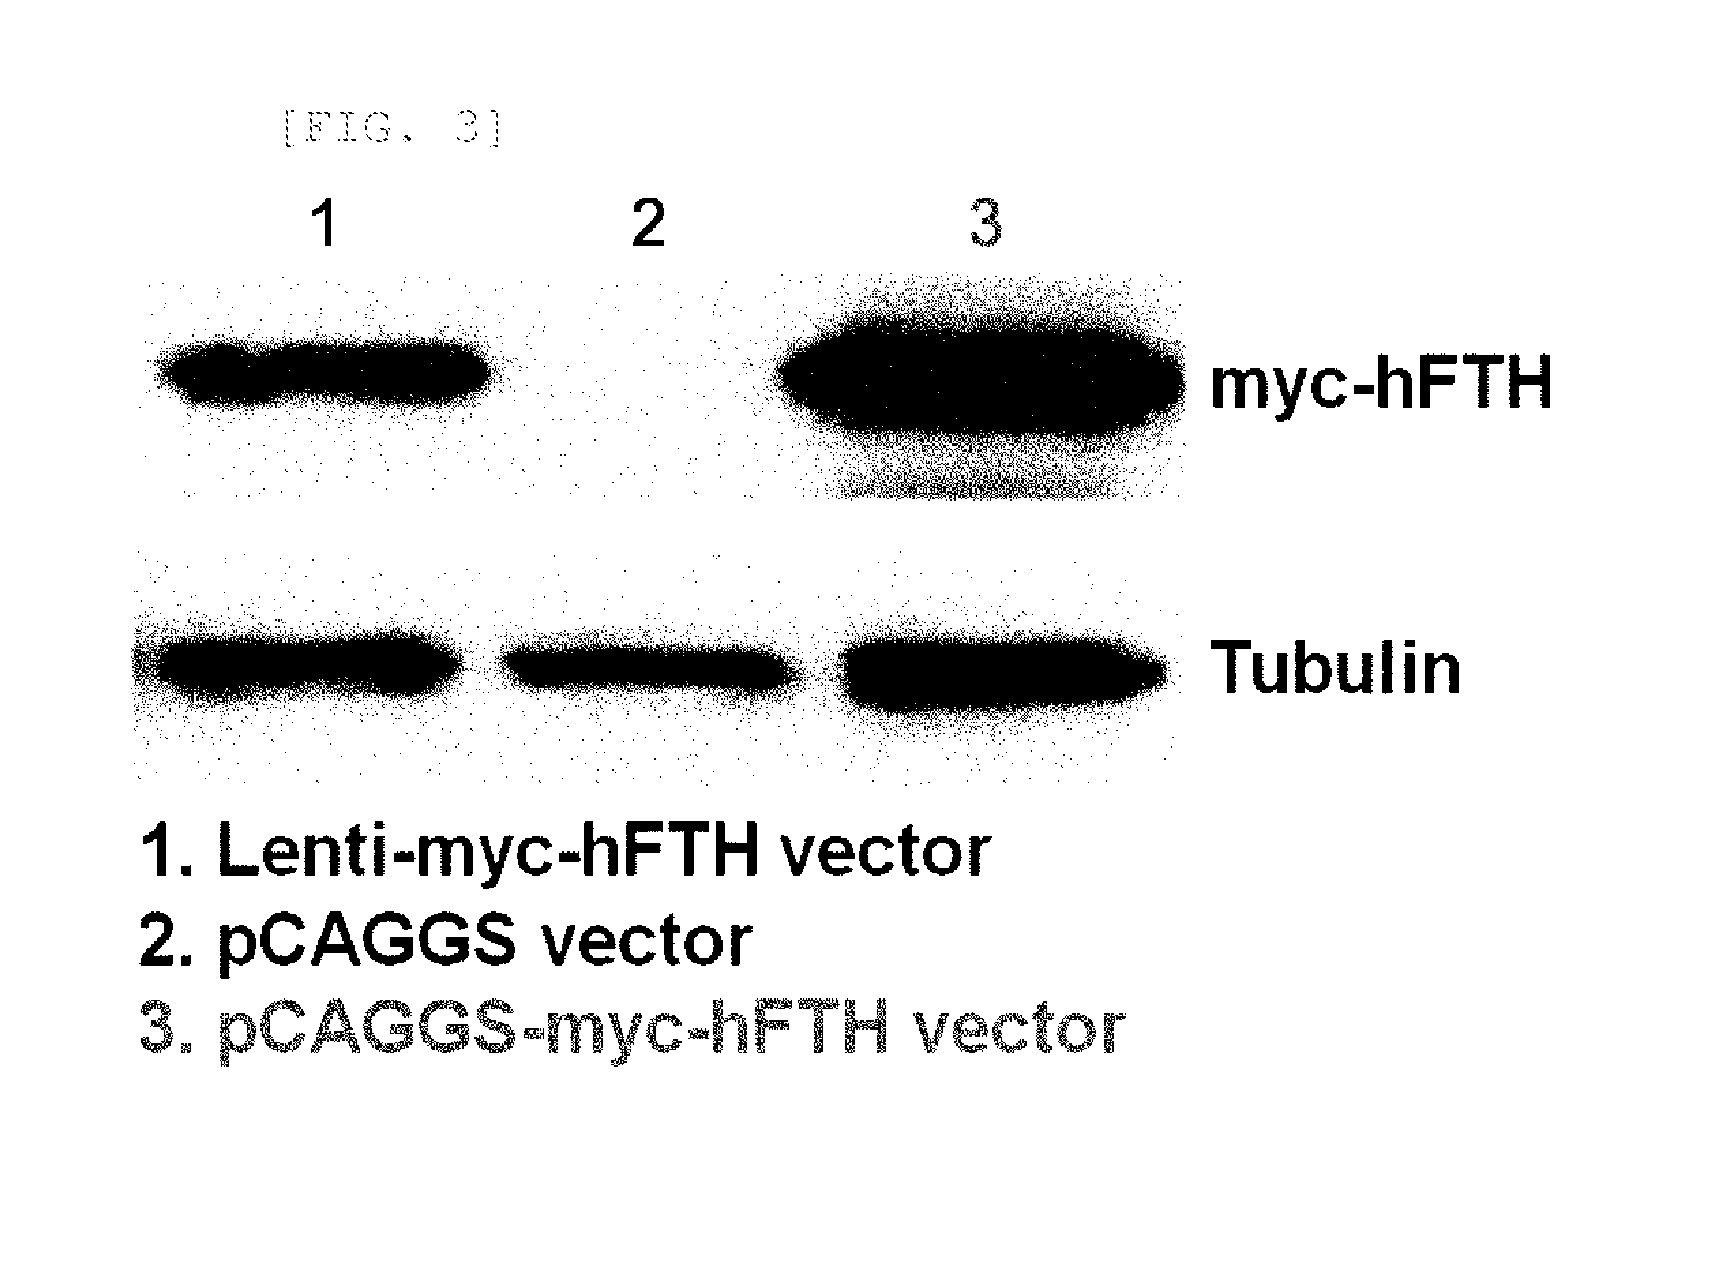 Transgenic mouse for expressing human ferritin in tissue non-specific manner and use thereof